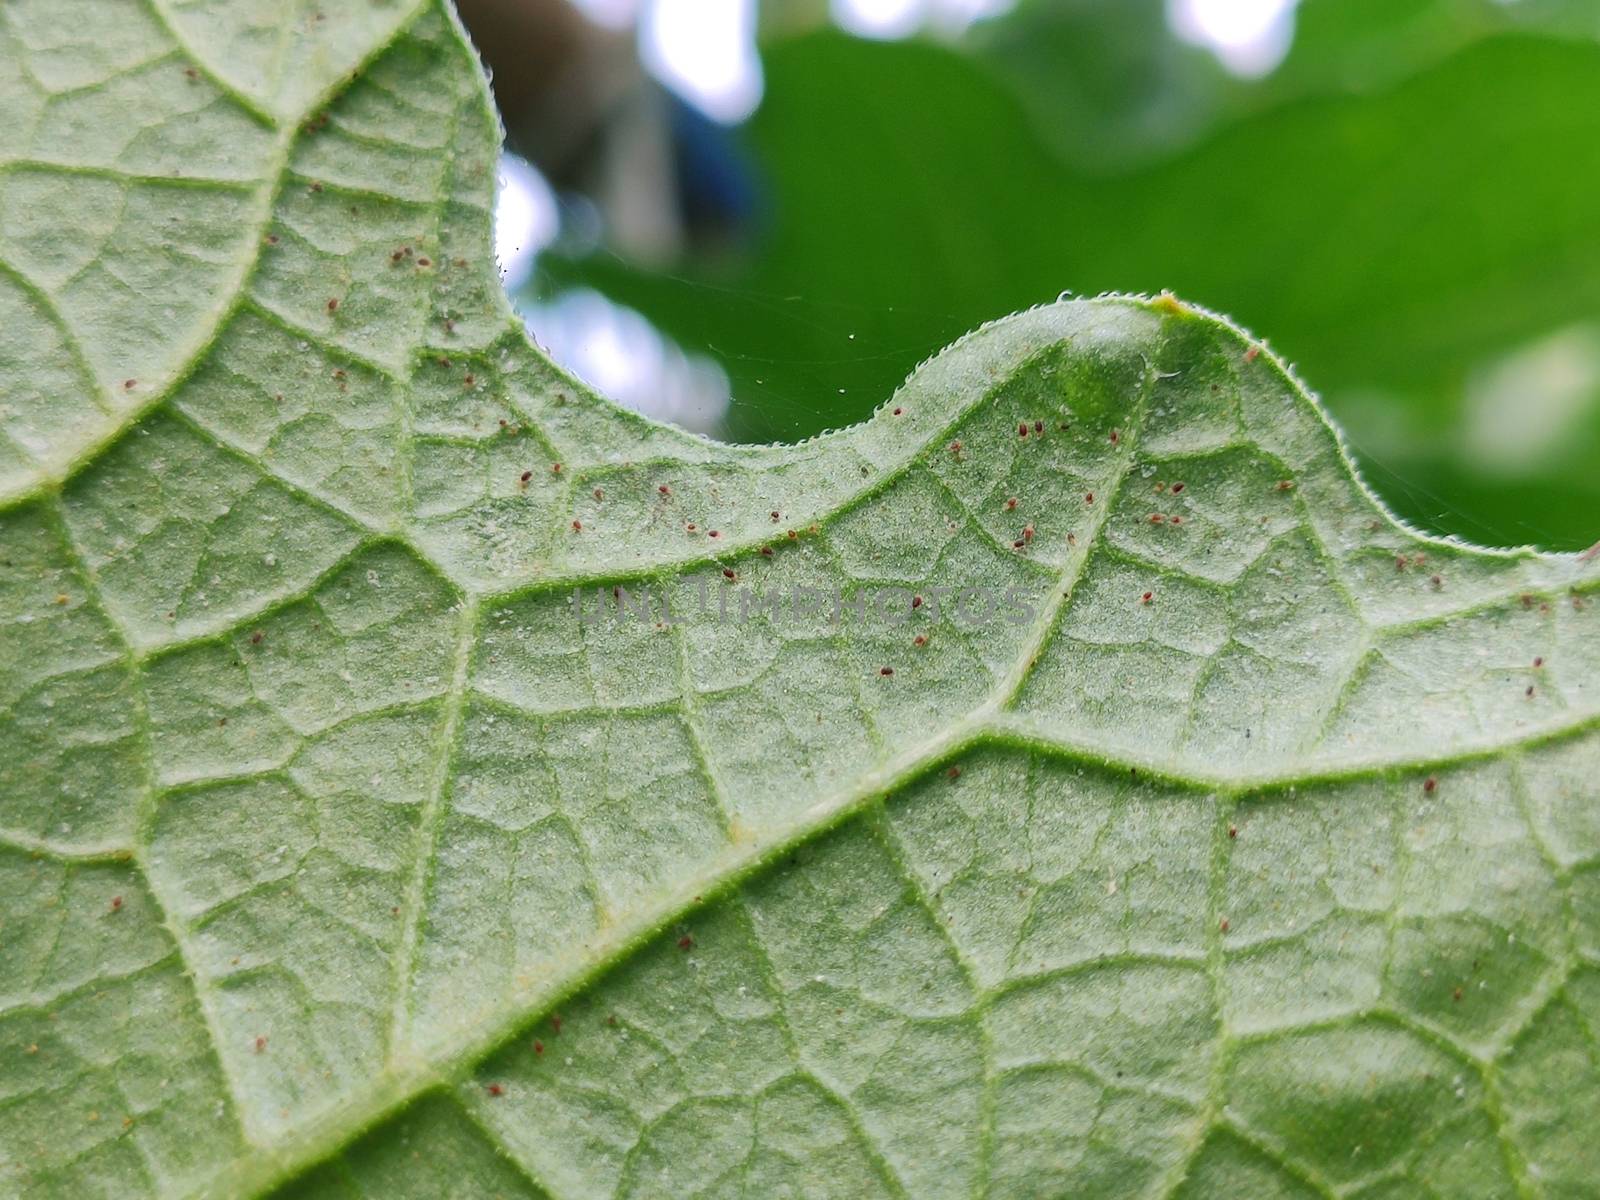 Red mite on green melon leaf by rukawajung